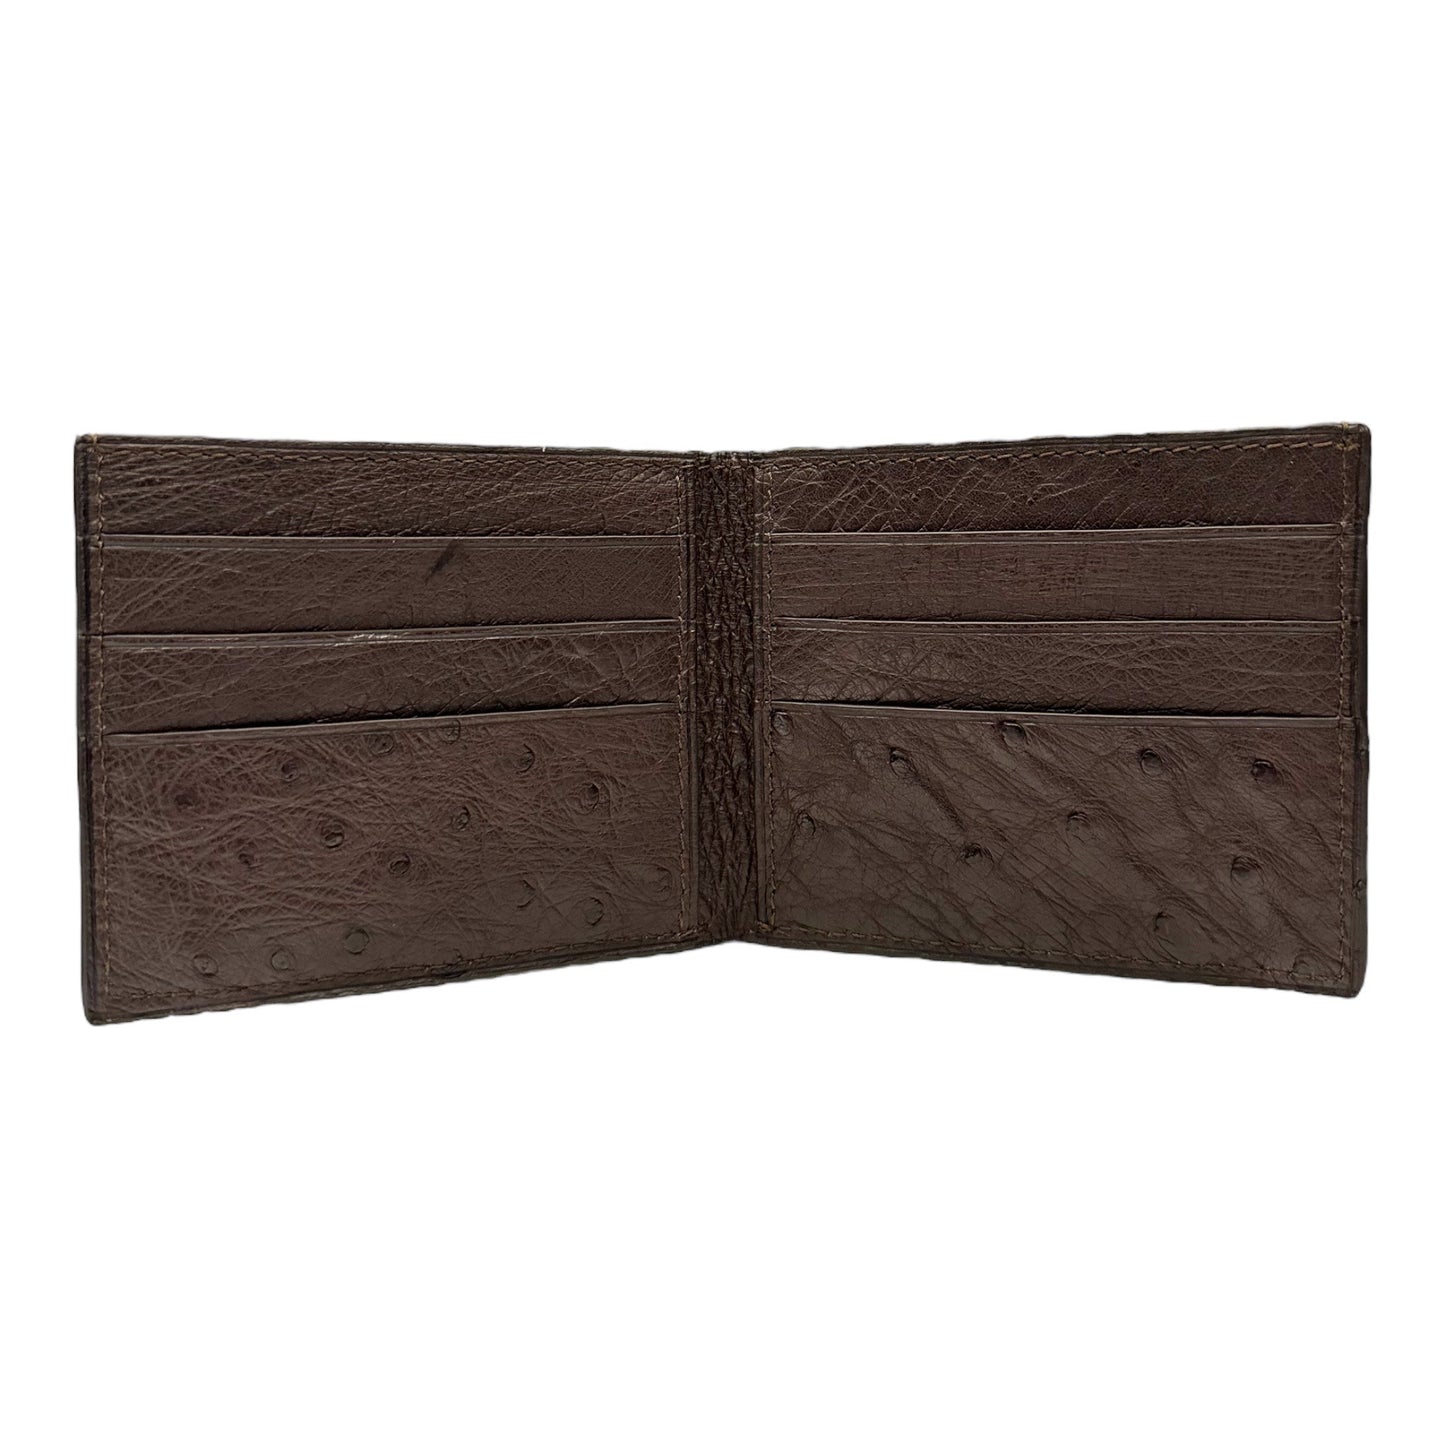 WALLET OSTRICH LEATHER TOSTED BROWN